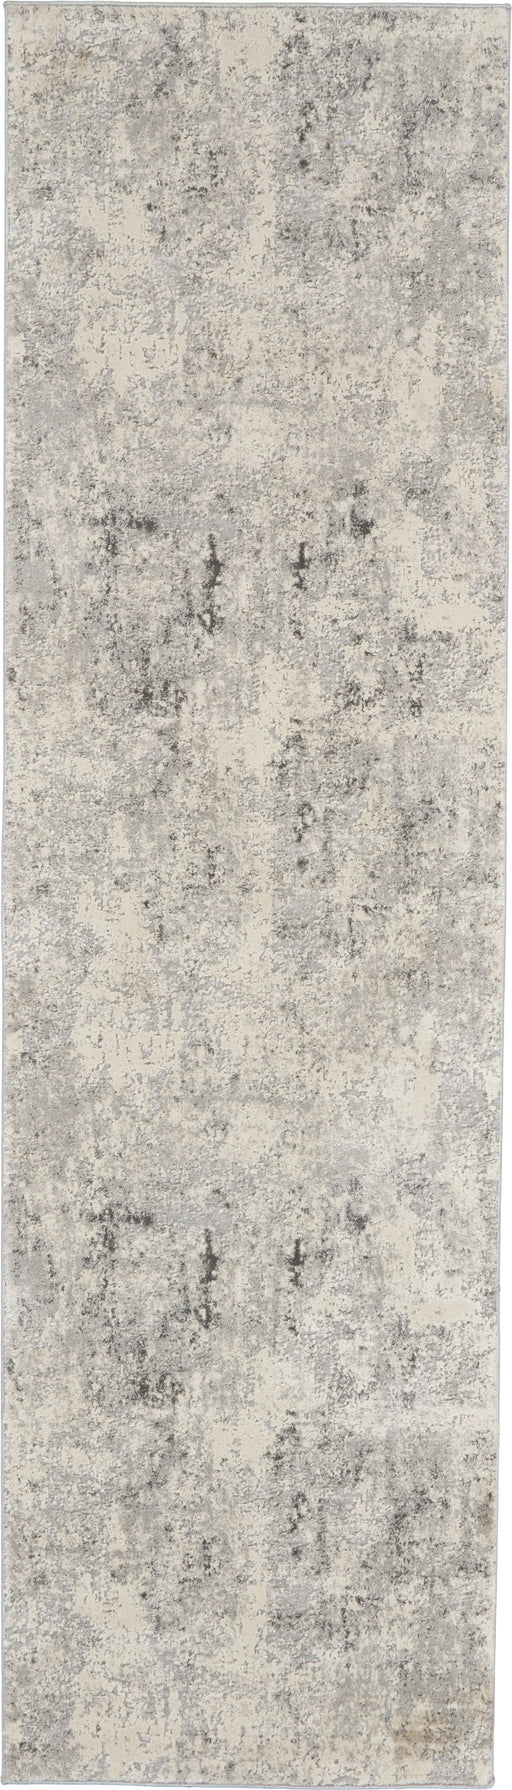 Nourison Rustic Textures RUS07 Ivory and Grey 8' Runner Hallway Rug